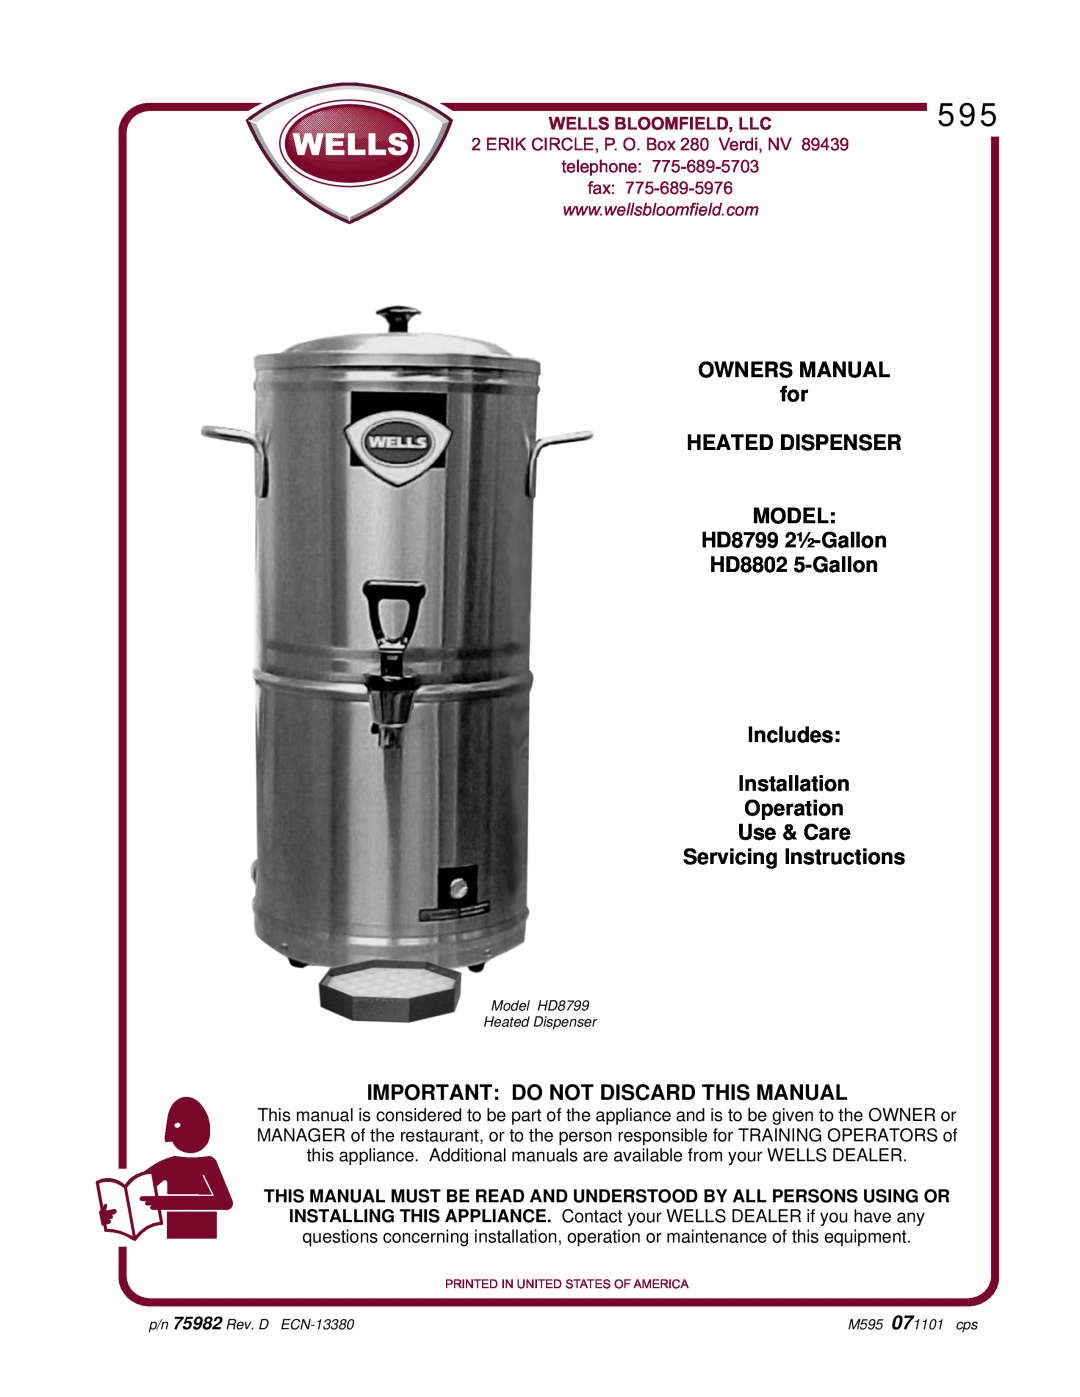 Wells owner manual HD8799 2½-Gallon HD8802 5-Gallon Includes, Installation Operation Use & Care, Servicing Instructions 